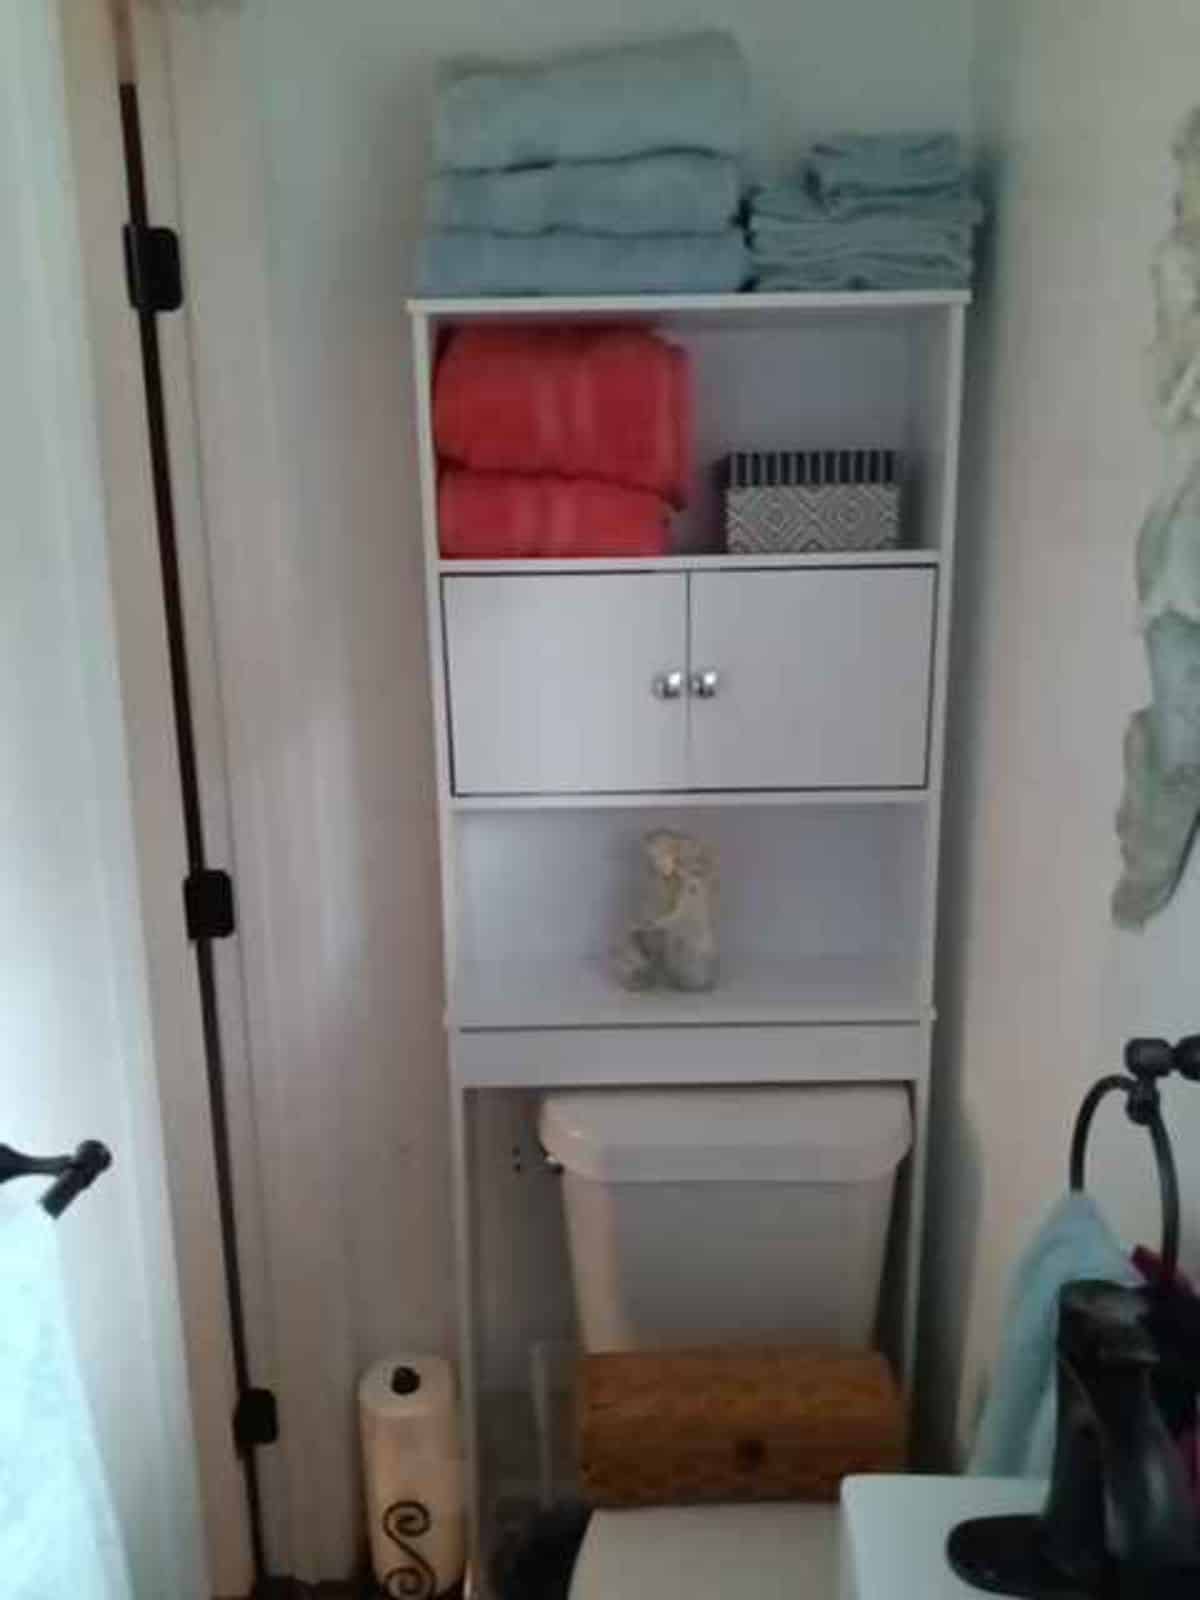 storage cabinets in the bathroom for toiletries and clothes